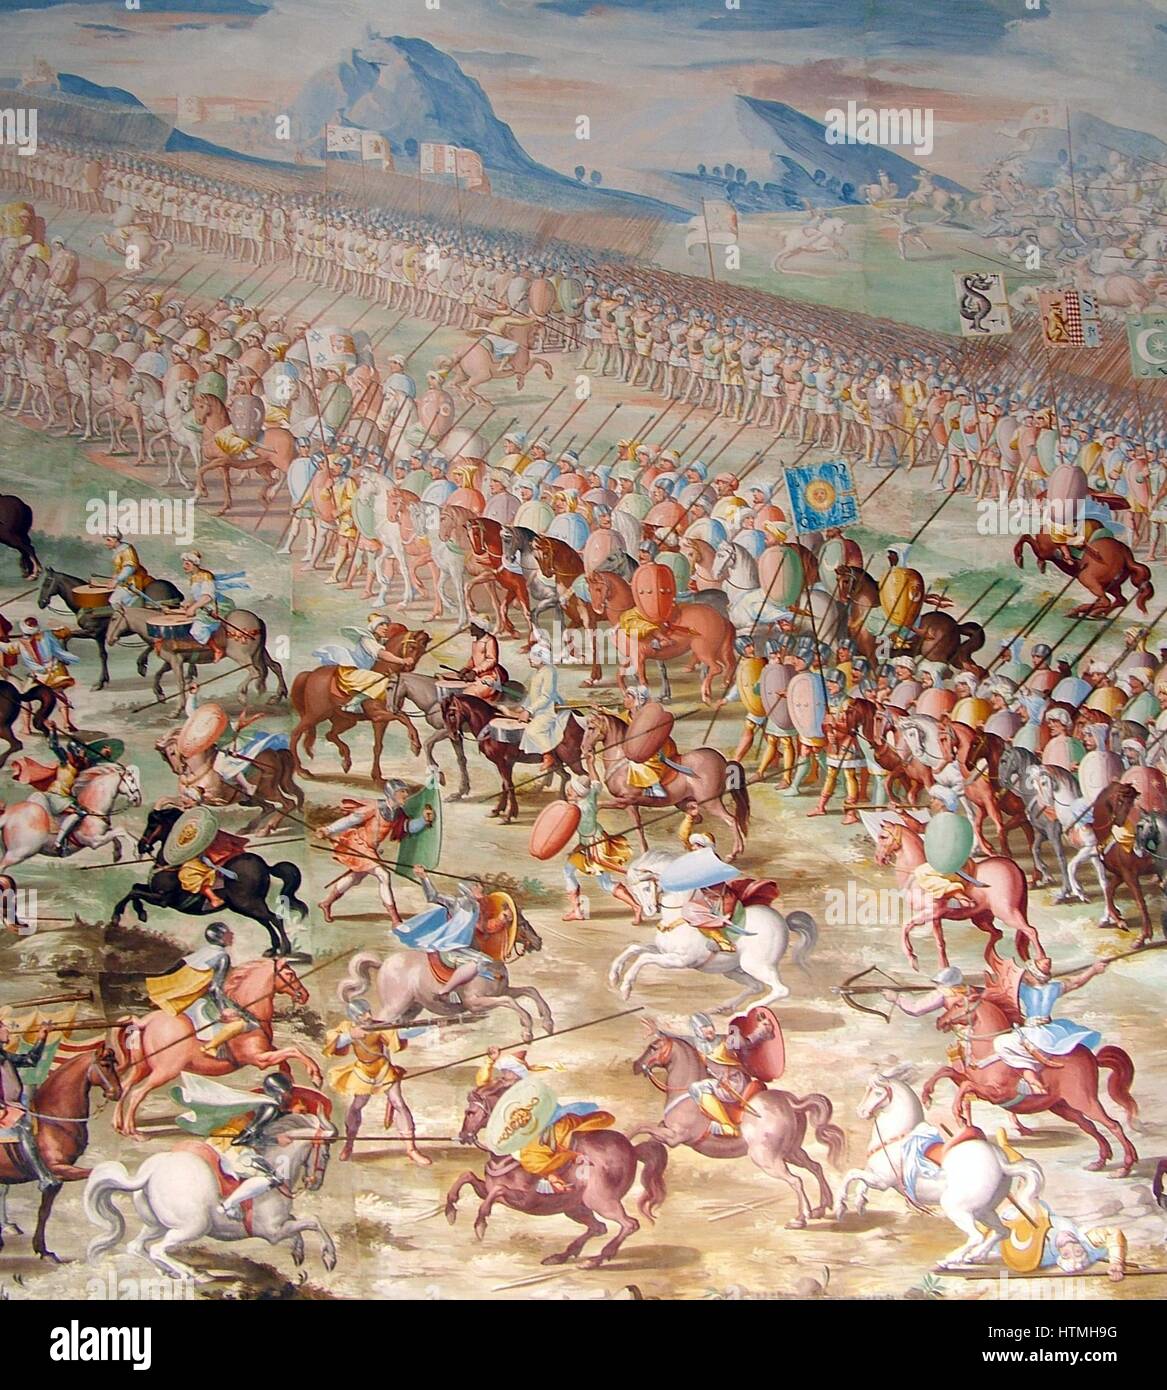 Forces of Muhammed IX, Nasrid Sultan of Granada, at the Battle of Higueruela 1431, as depicted in a series of fresco paintings by Fabrizio Castello, Orazio Cambiaso and Lazzaro Tavarone in the Gallery of Battles at the Royal Monastery of San Lorenzo de El Escorial, Spain. Stock Photo